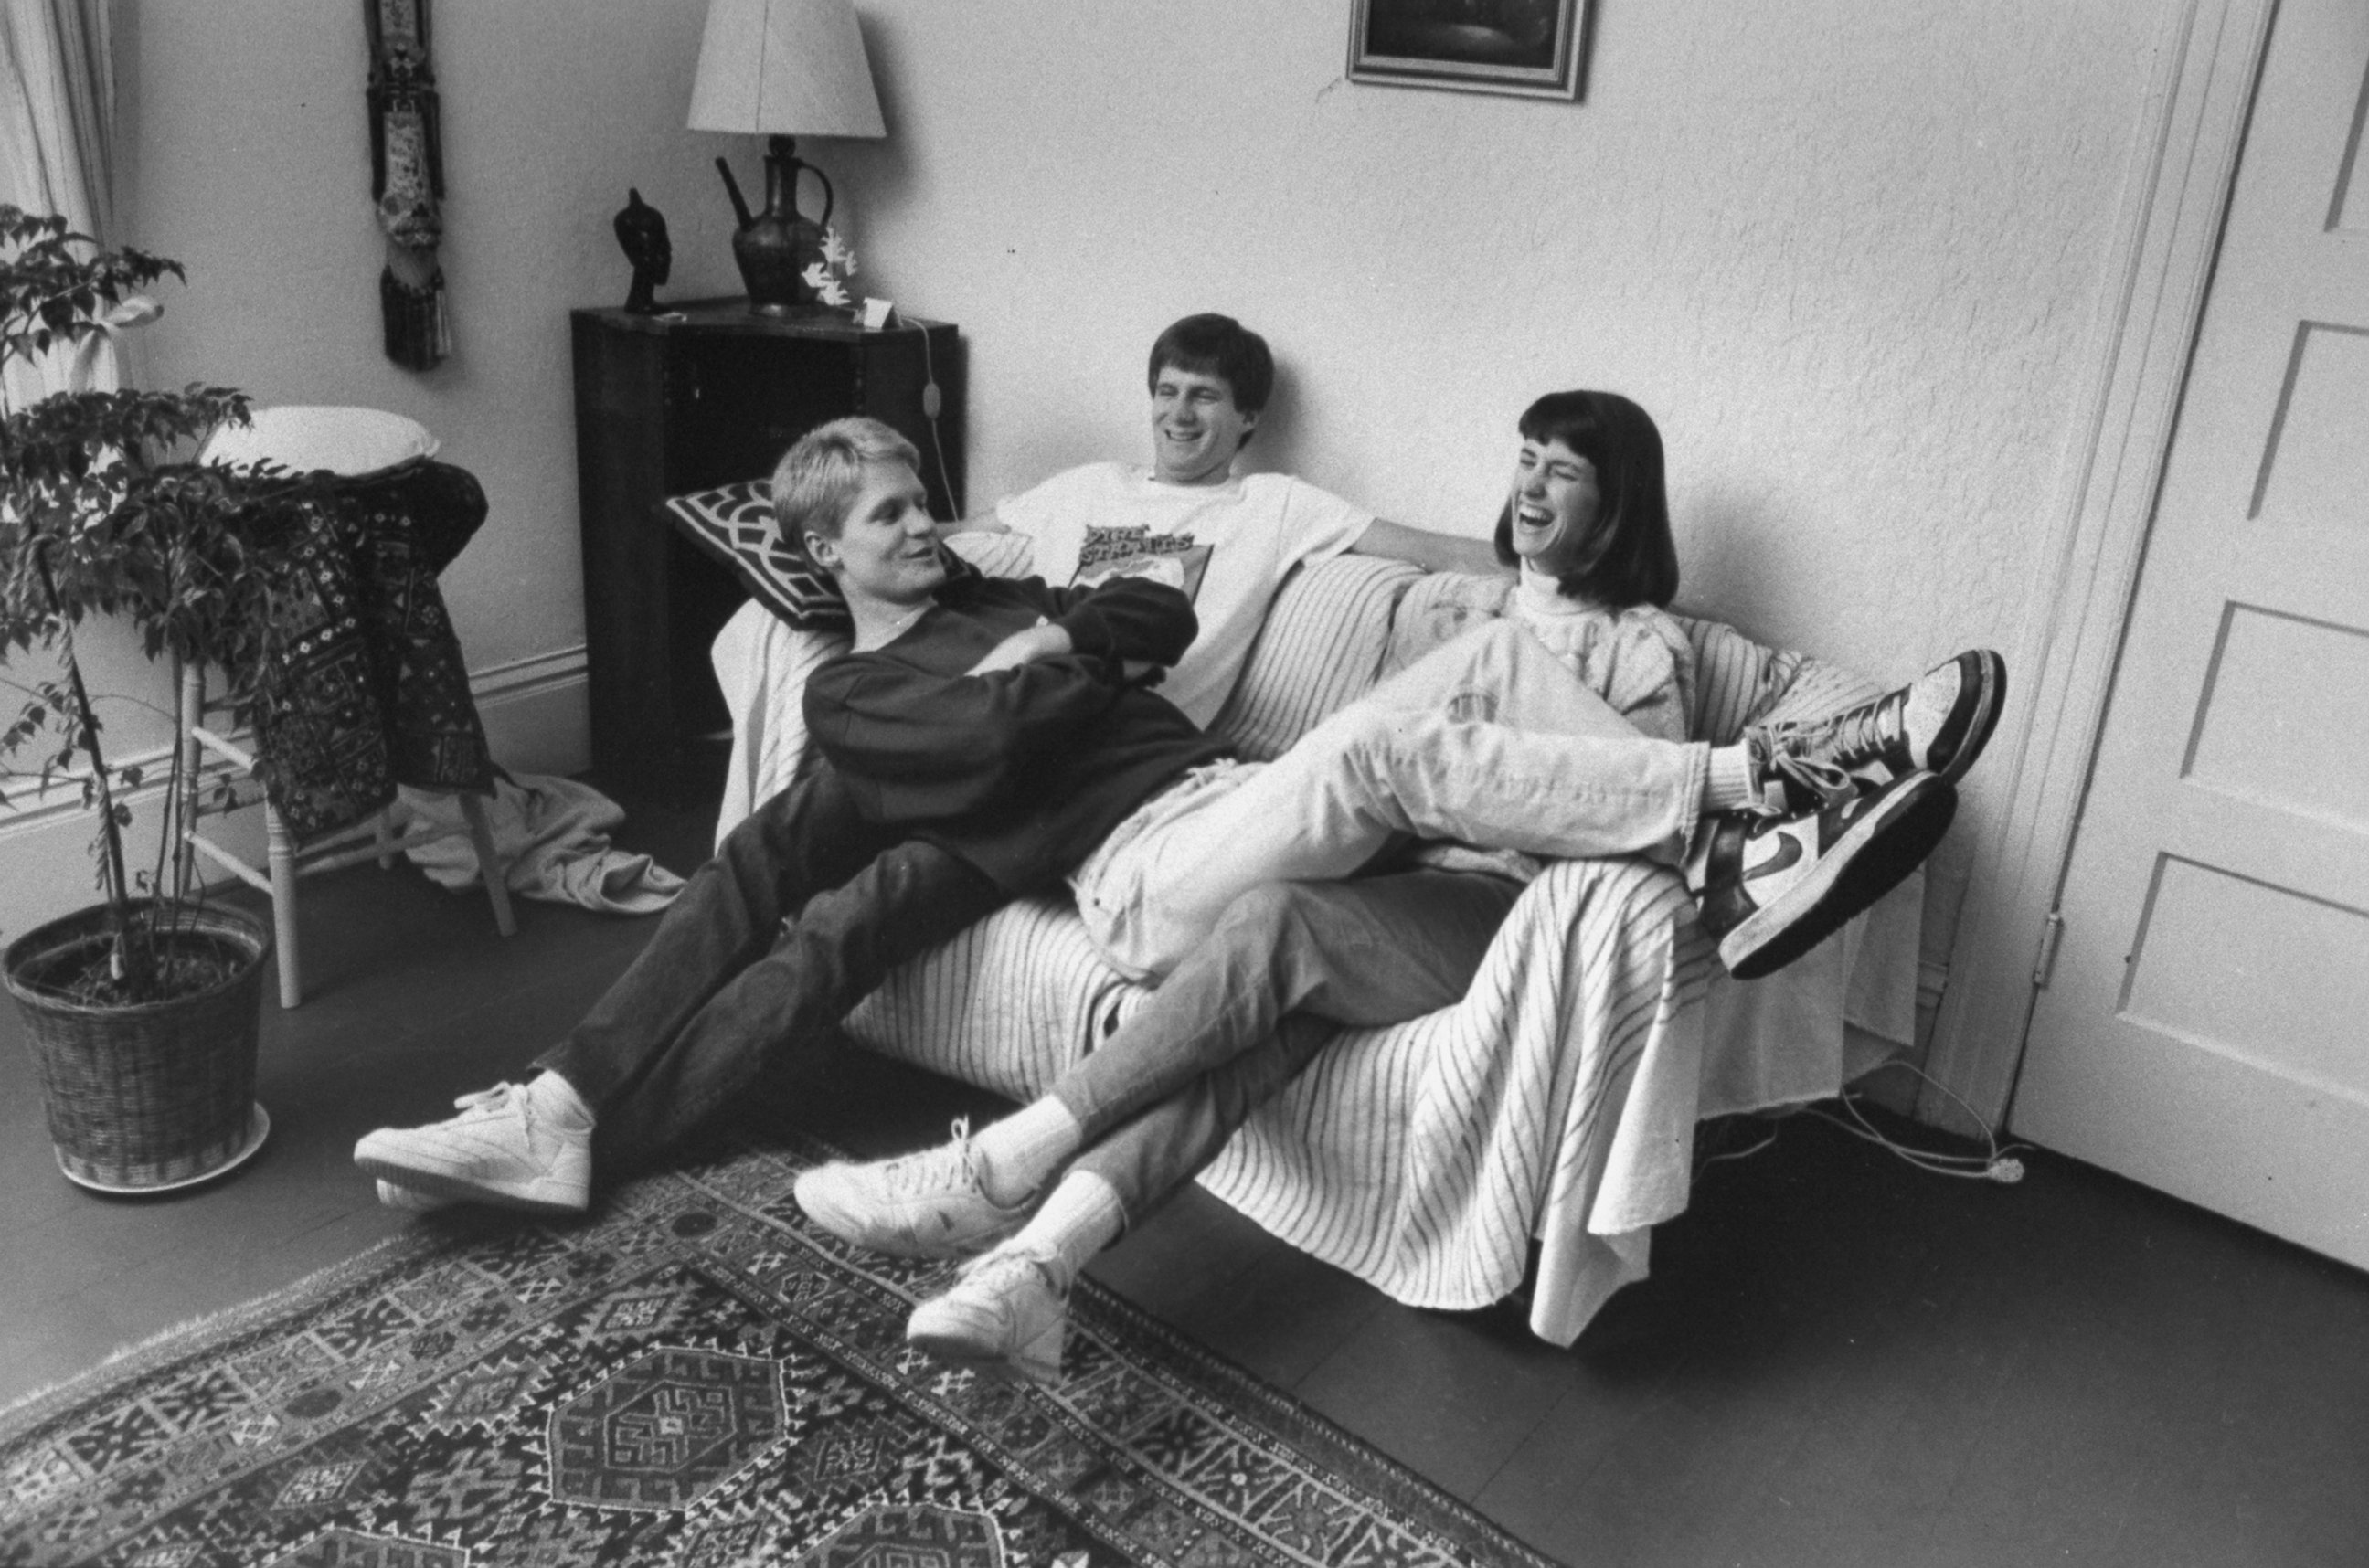 PHOTO: Basketball player Steve Kerr of University of Arizona with his brother, John and sister, Susan, in 1988.